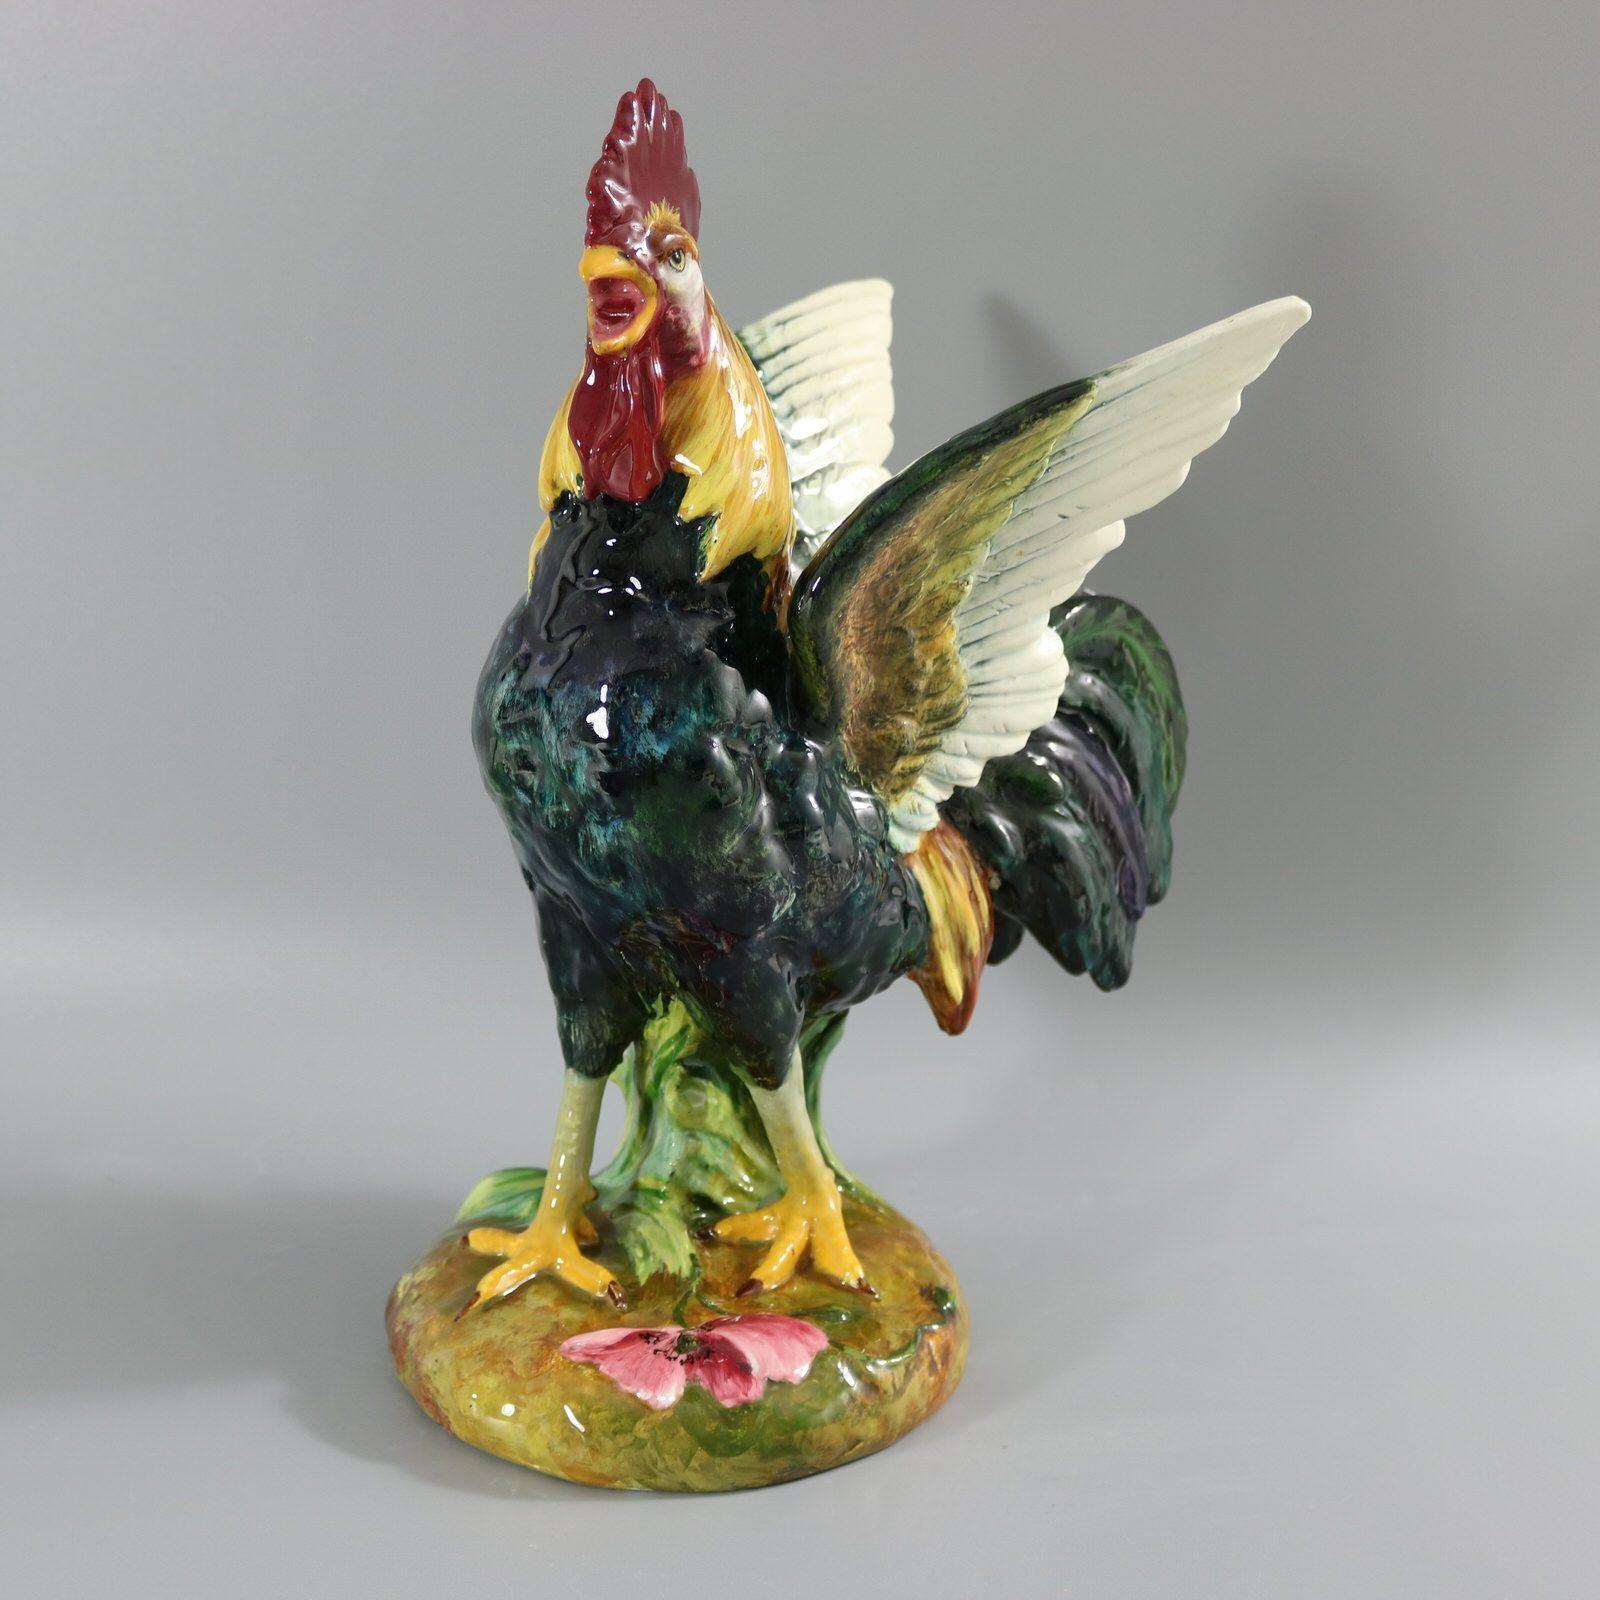 Delphin Massier French Majolica figural vase which features a crowing rooster with it's wings outstretched. A hand painted flower on the base. Colouration: teal blue white, yellow, are predominant. The piece bears maker's marks for the Delphin